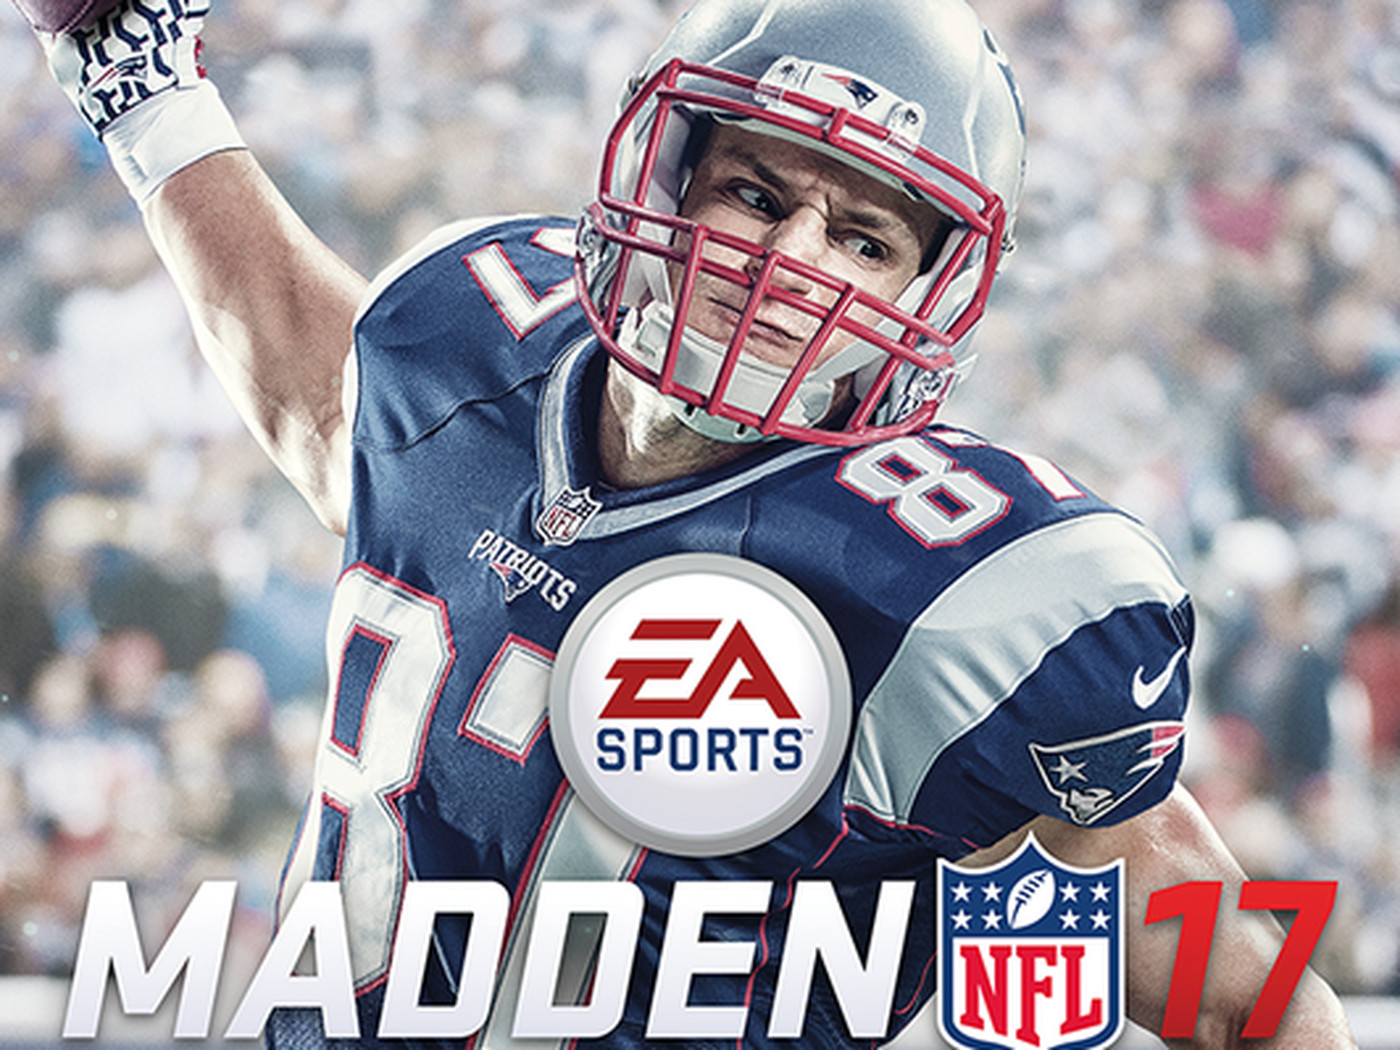 Rob gronkowski will be on the cover of madden